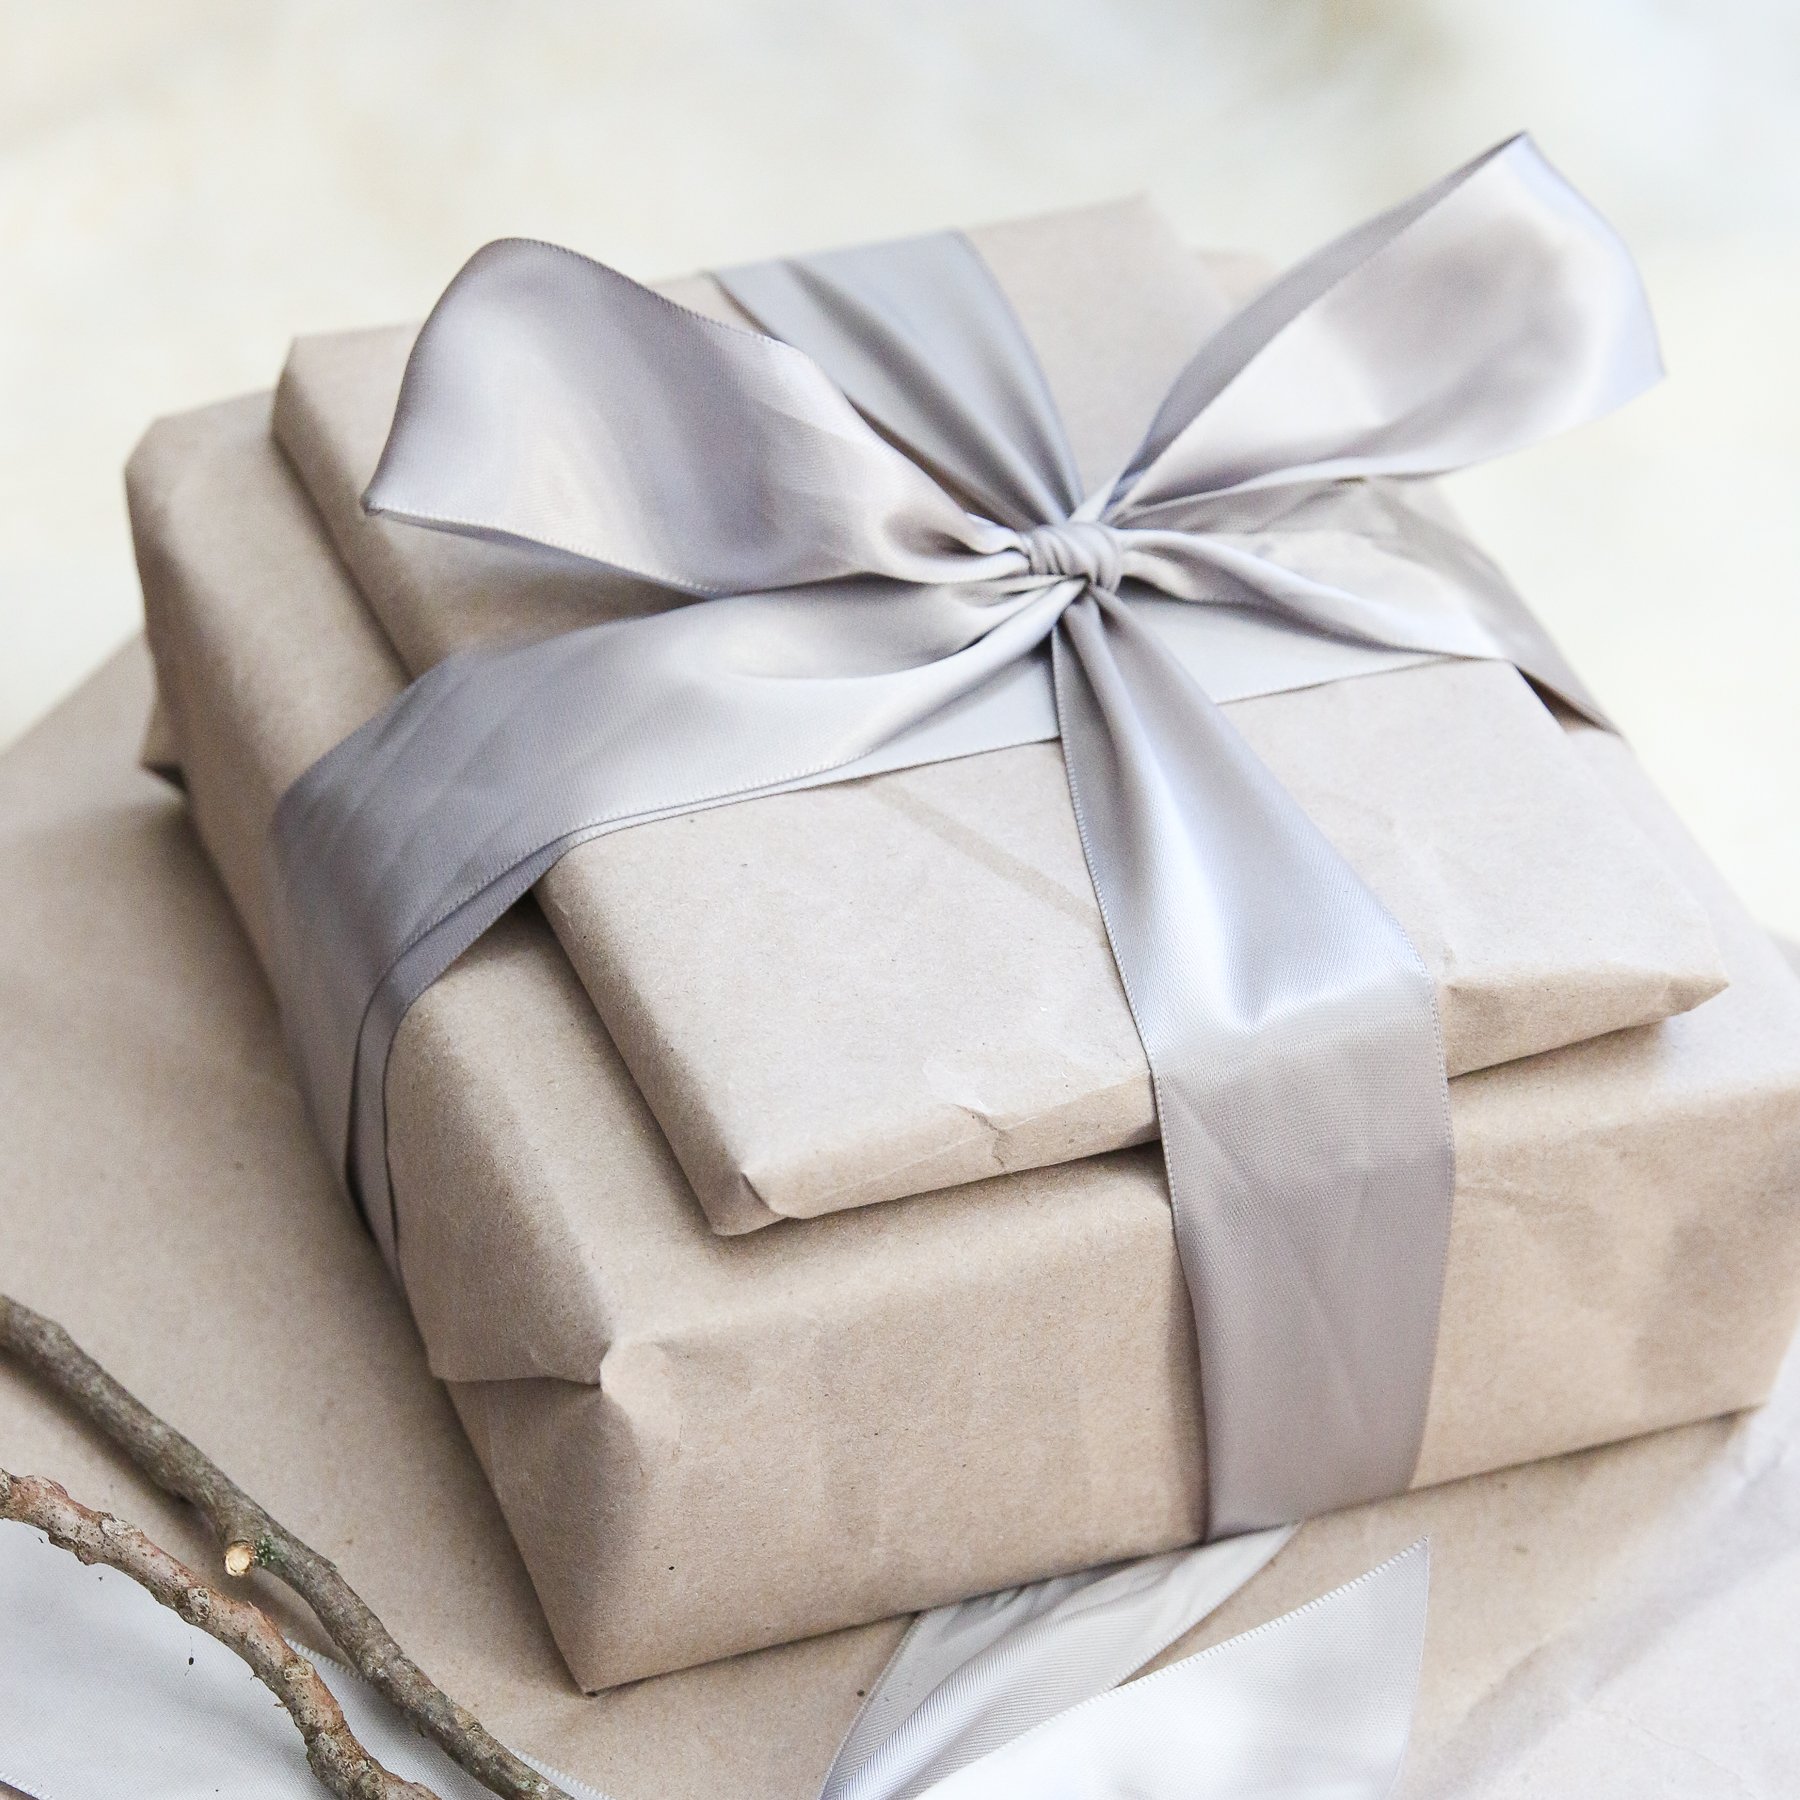 10 Free Zero Waste Gift Wrap Alternatives From Upcycled Shipping Materials